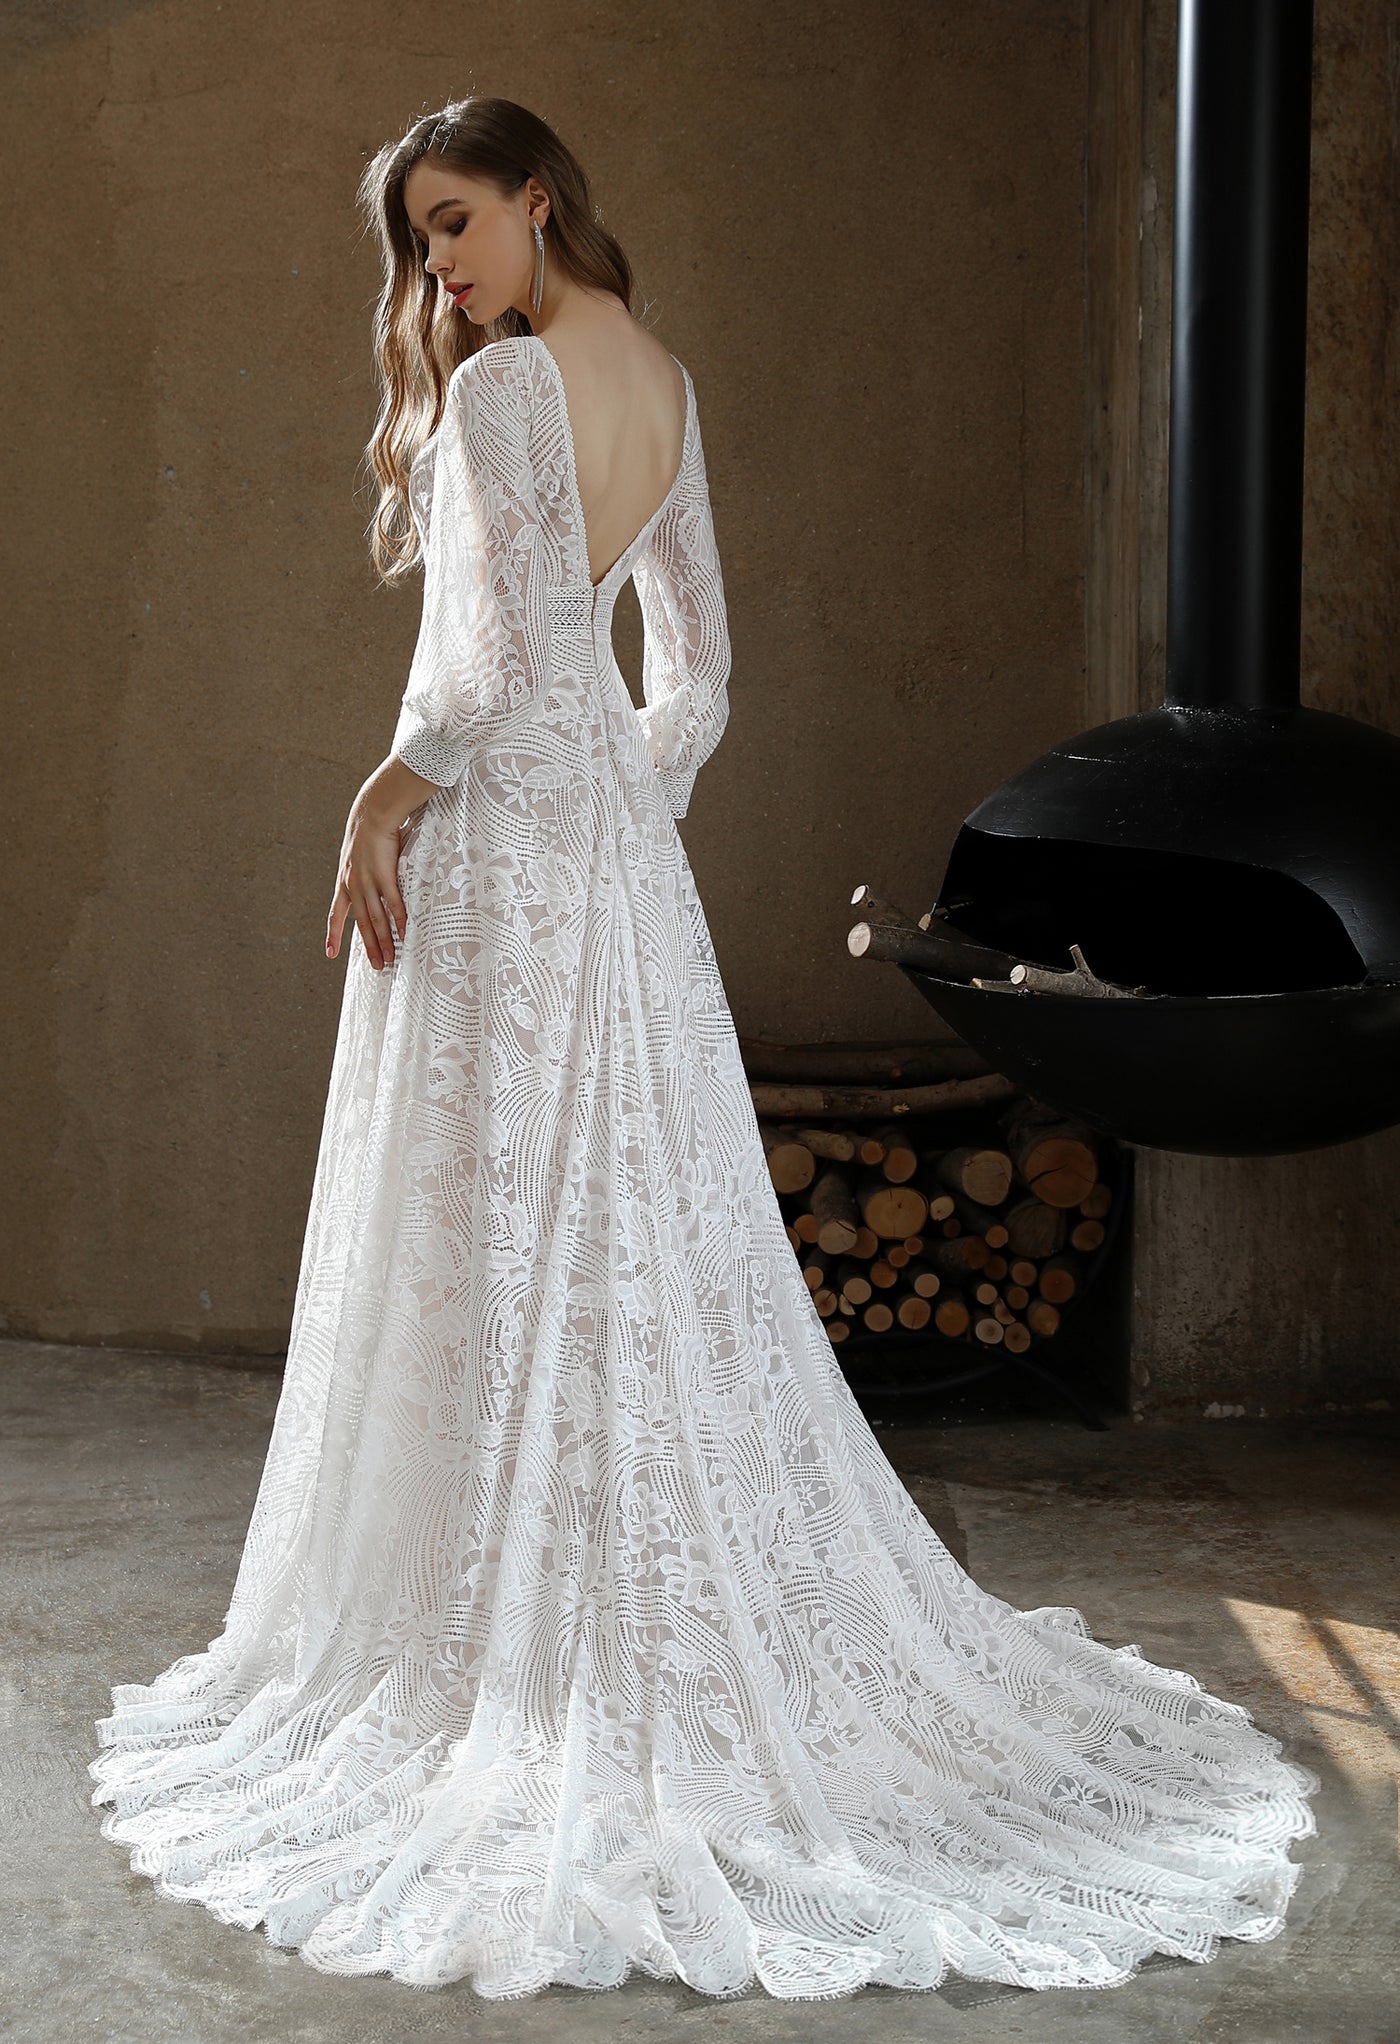 The back of a woman in a Bergamot Bridal Plunging V-neck Lace Long Sleeve Bohemian Wedding Gown.